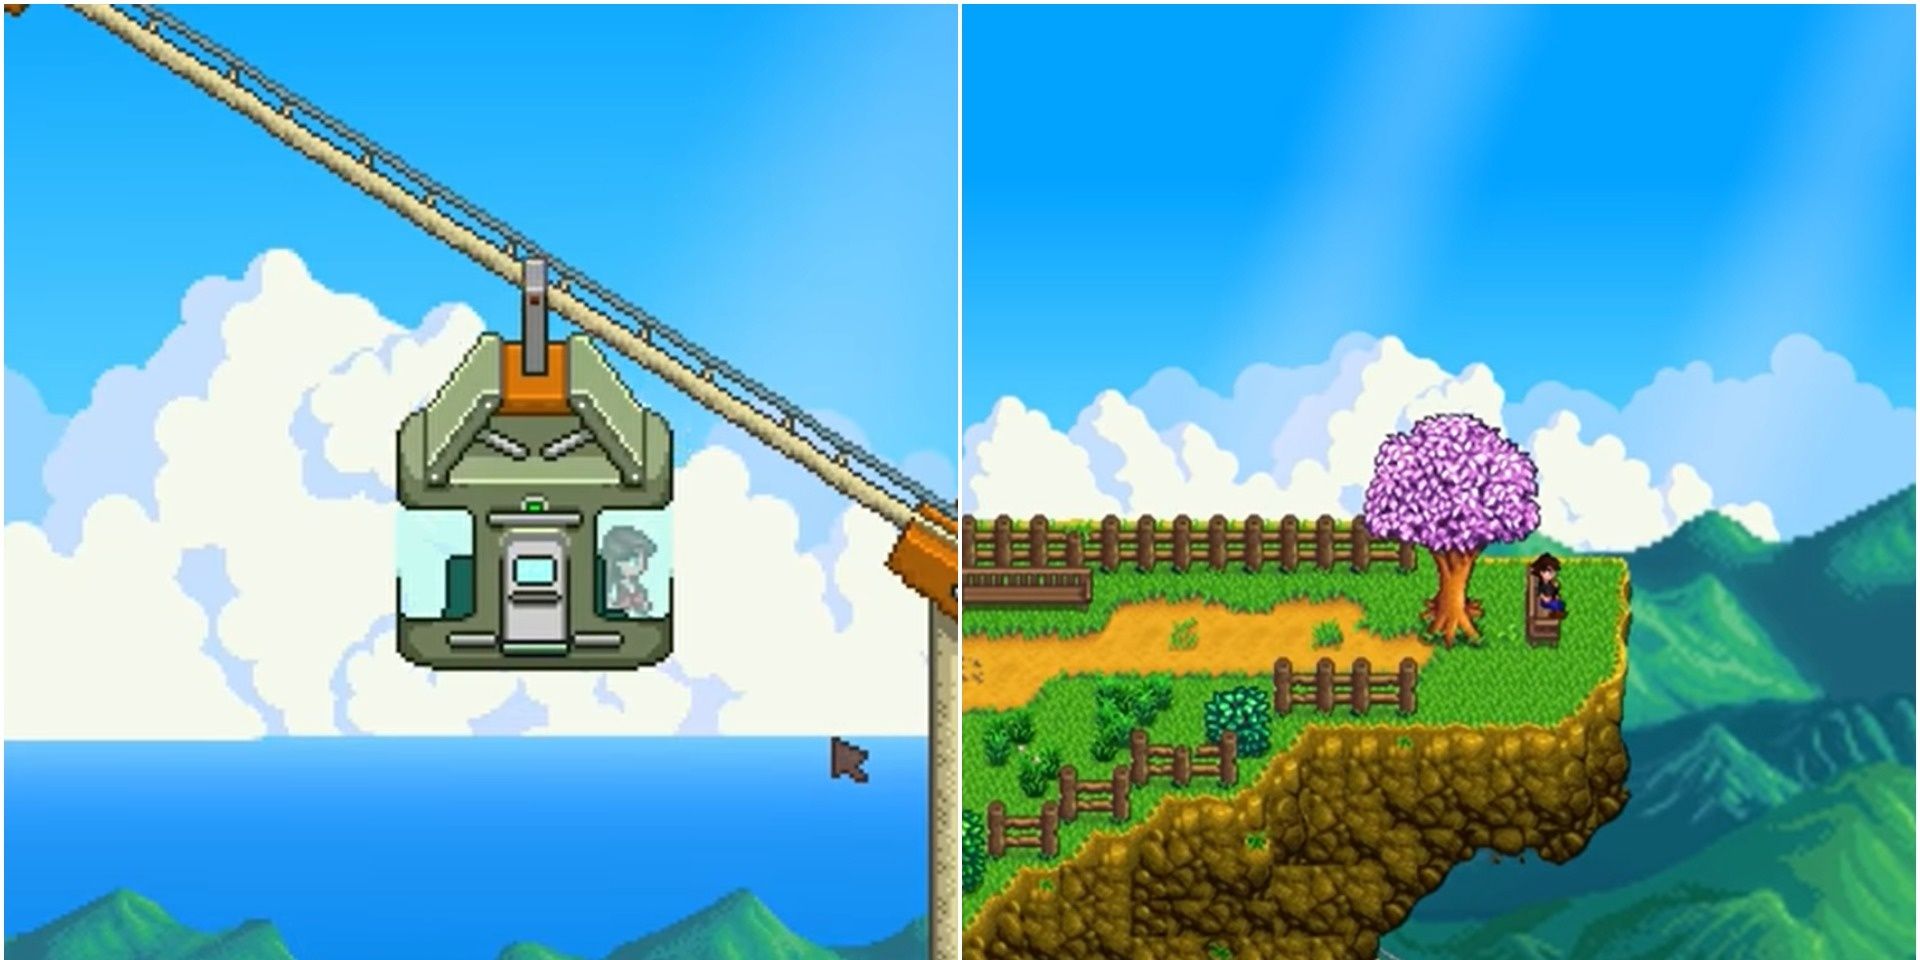 A split image - left: someone sits in the Cable Car on the way up to Ridgeside village. Right: Theyre sitting on a bench overlooking the Ridgeside Village peak.